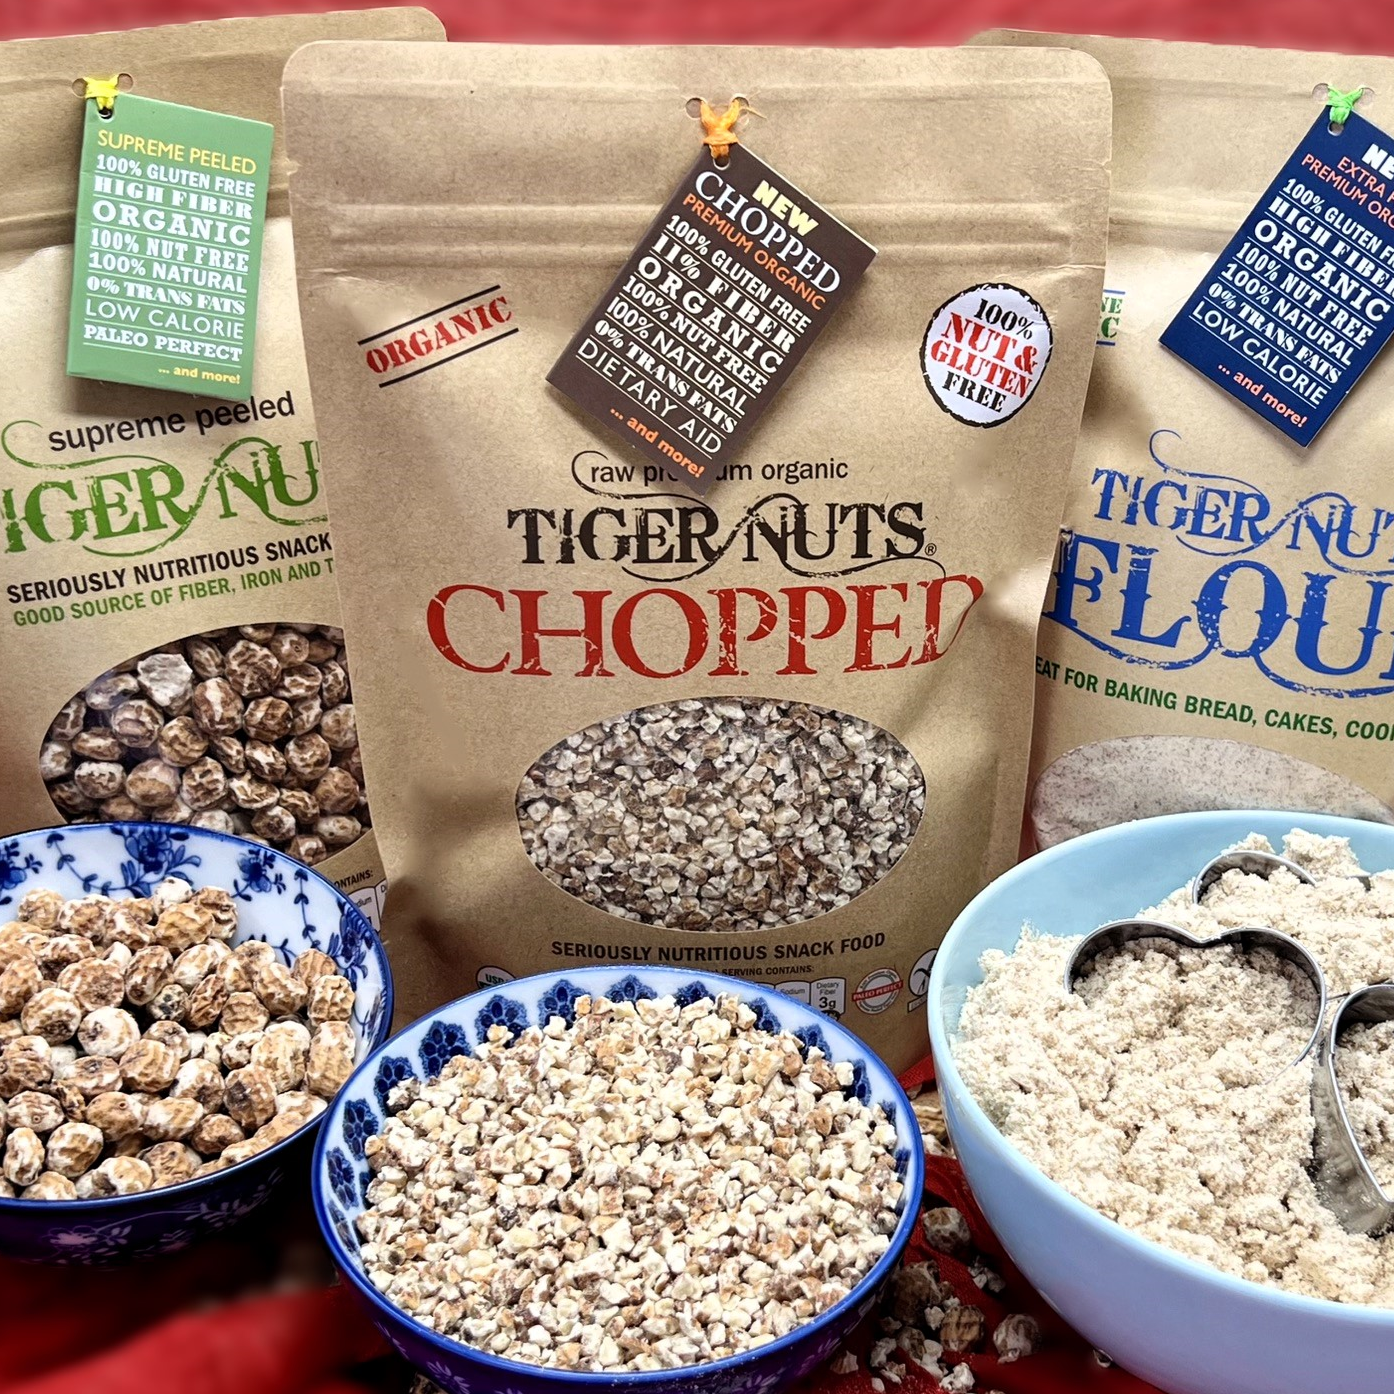 Tiger Nuts Chopped Tiger Nuts in 12 oz Bags